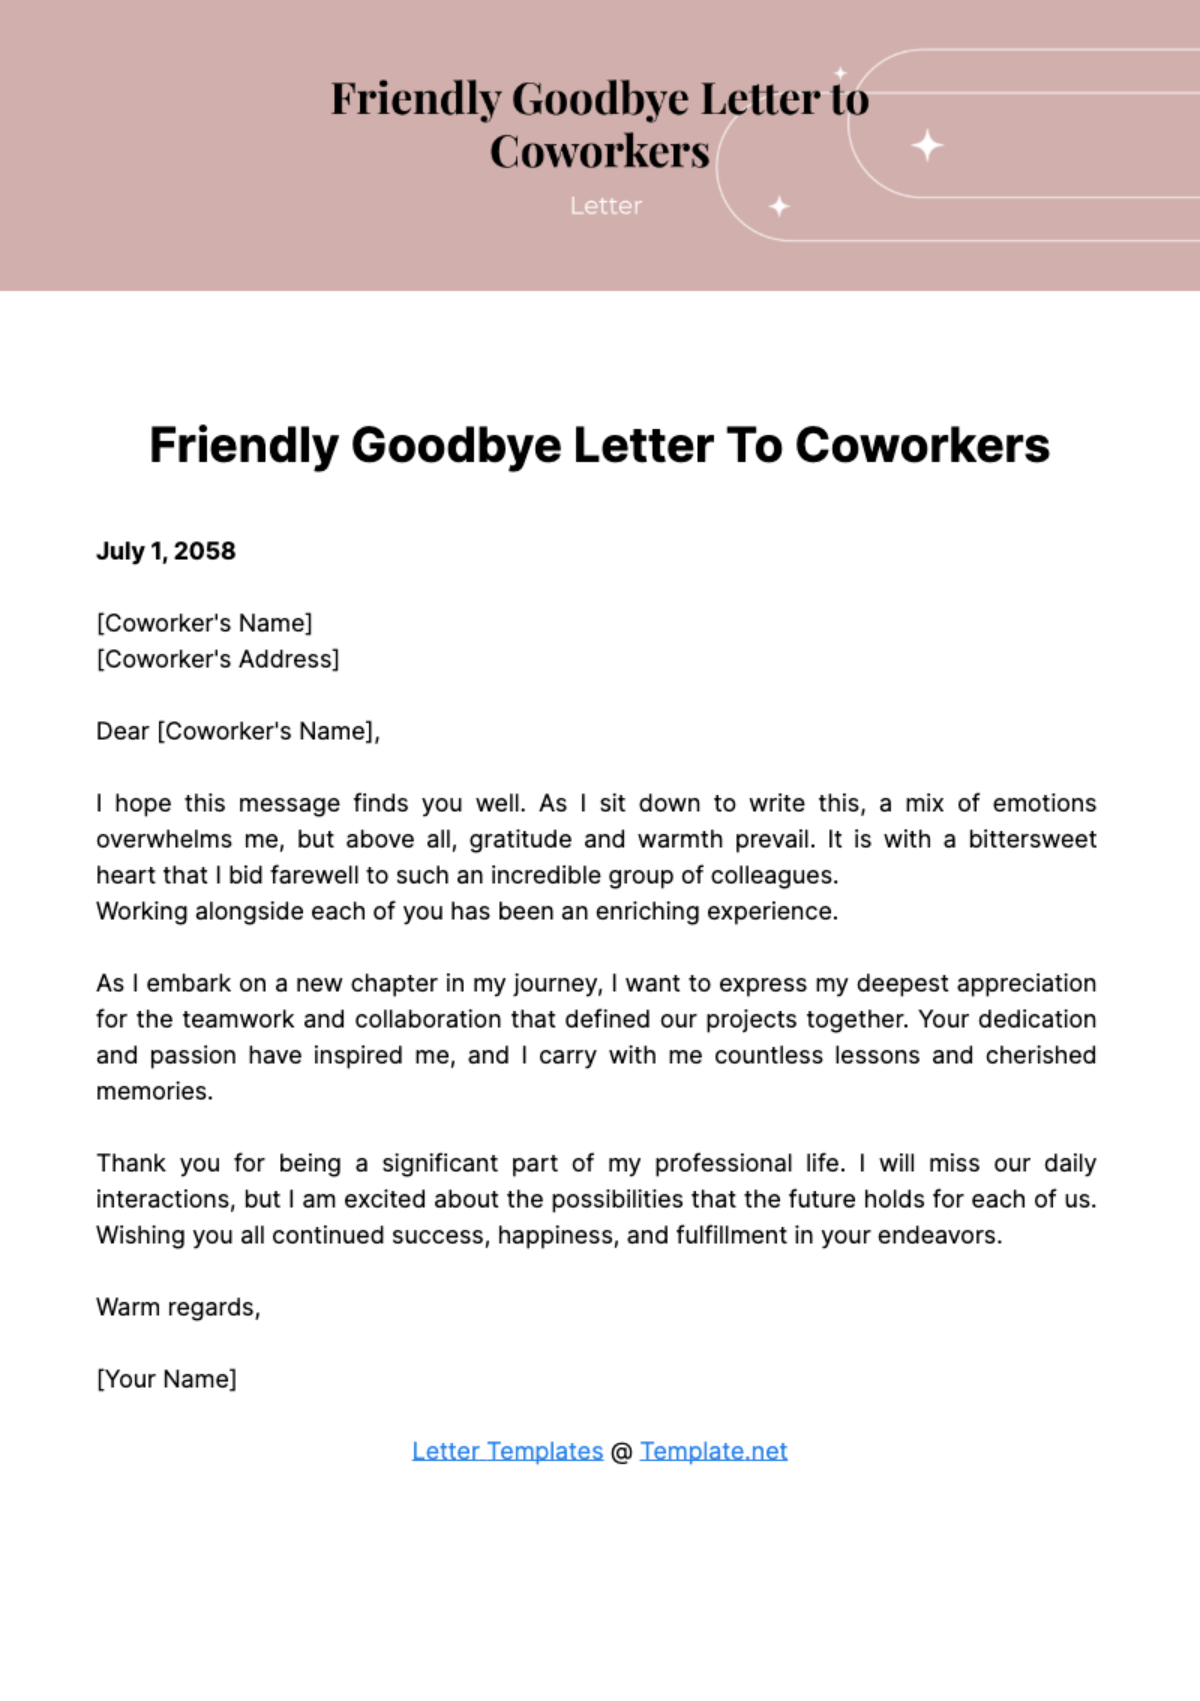 Friendly Goodbye Letter to Coworkers Template